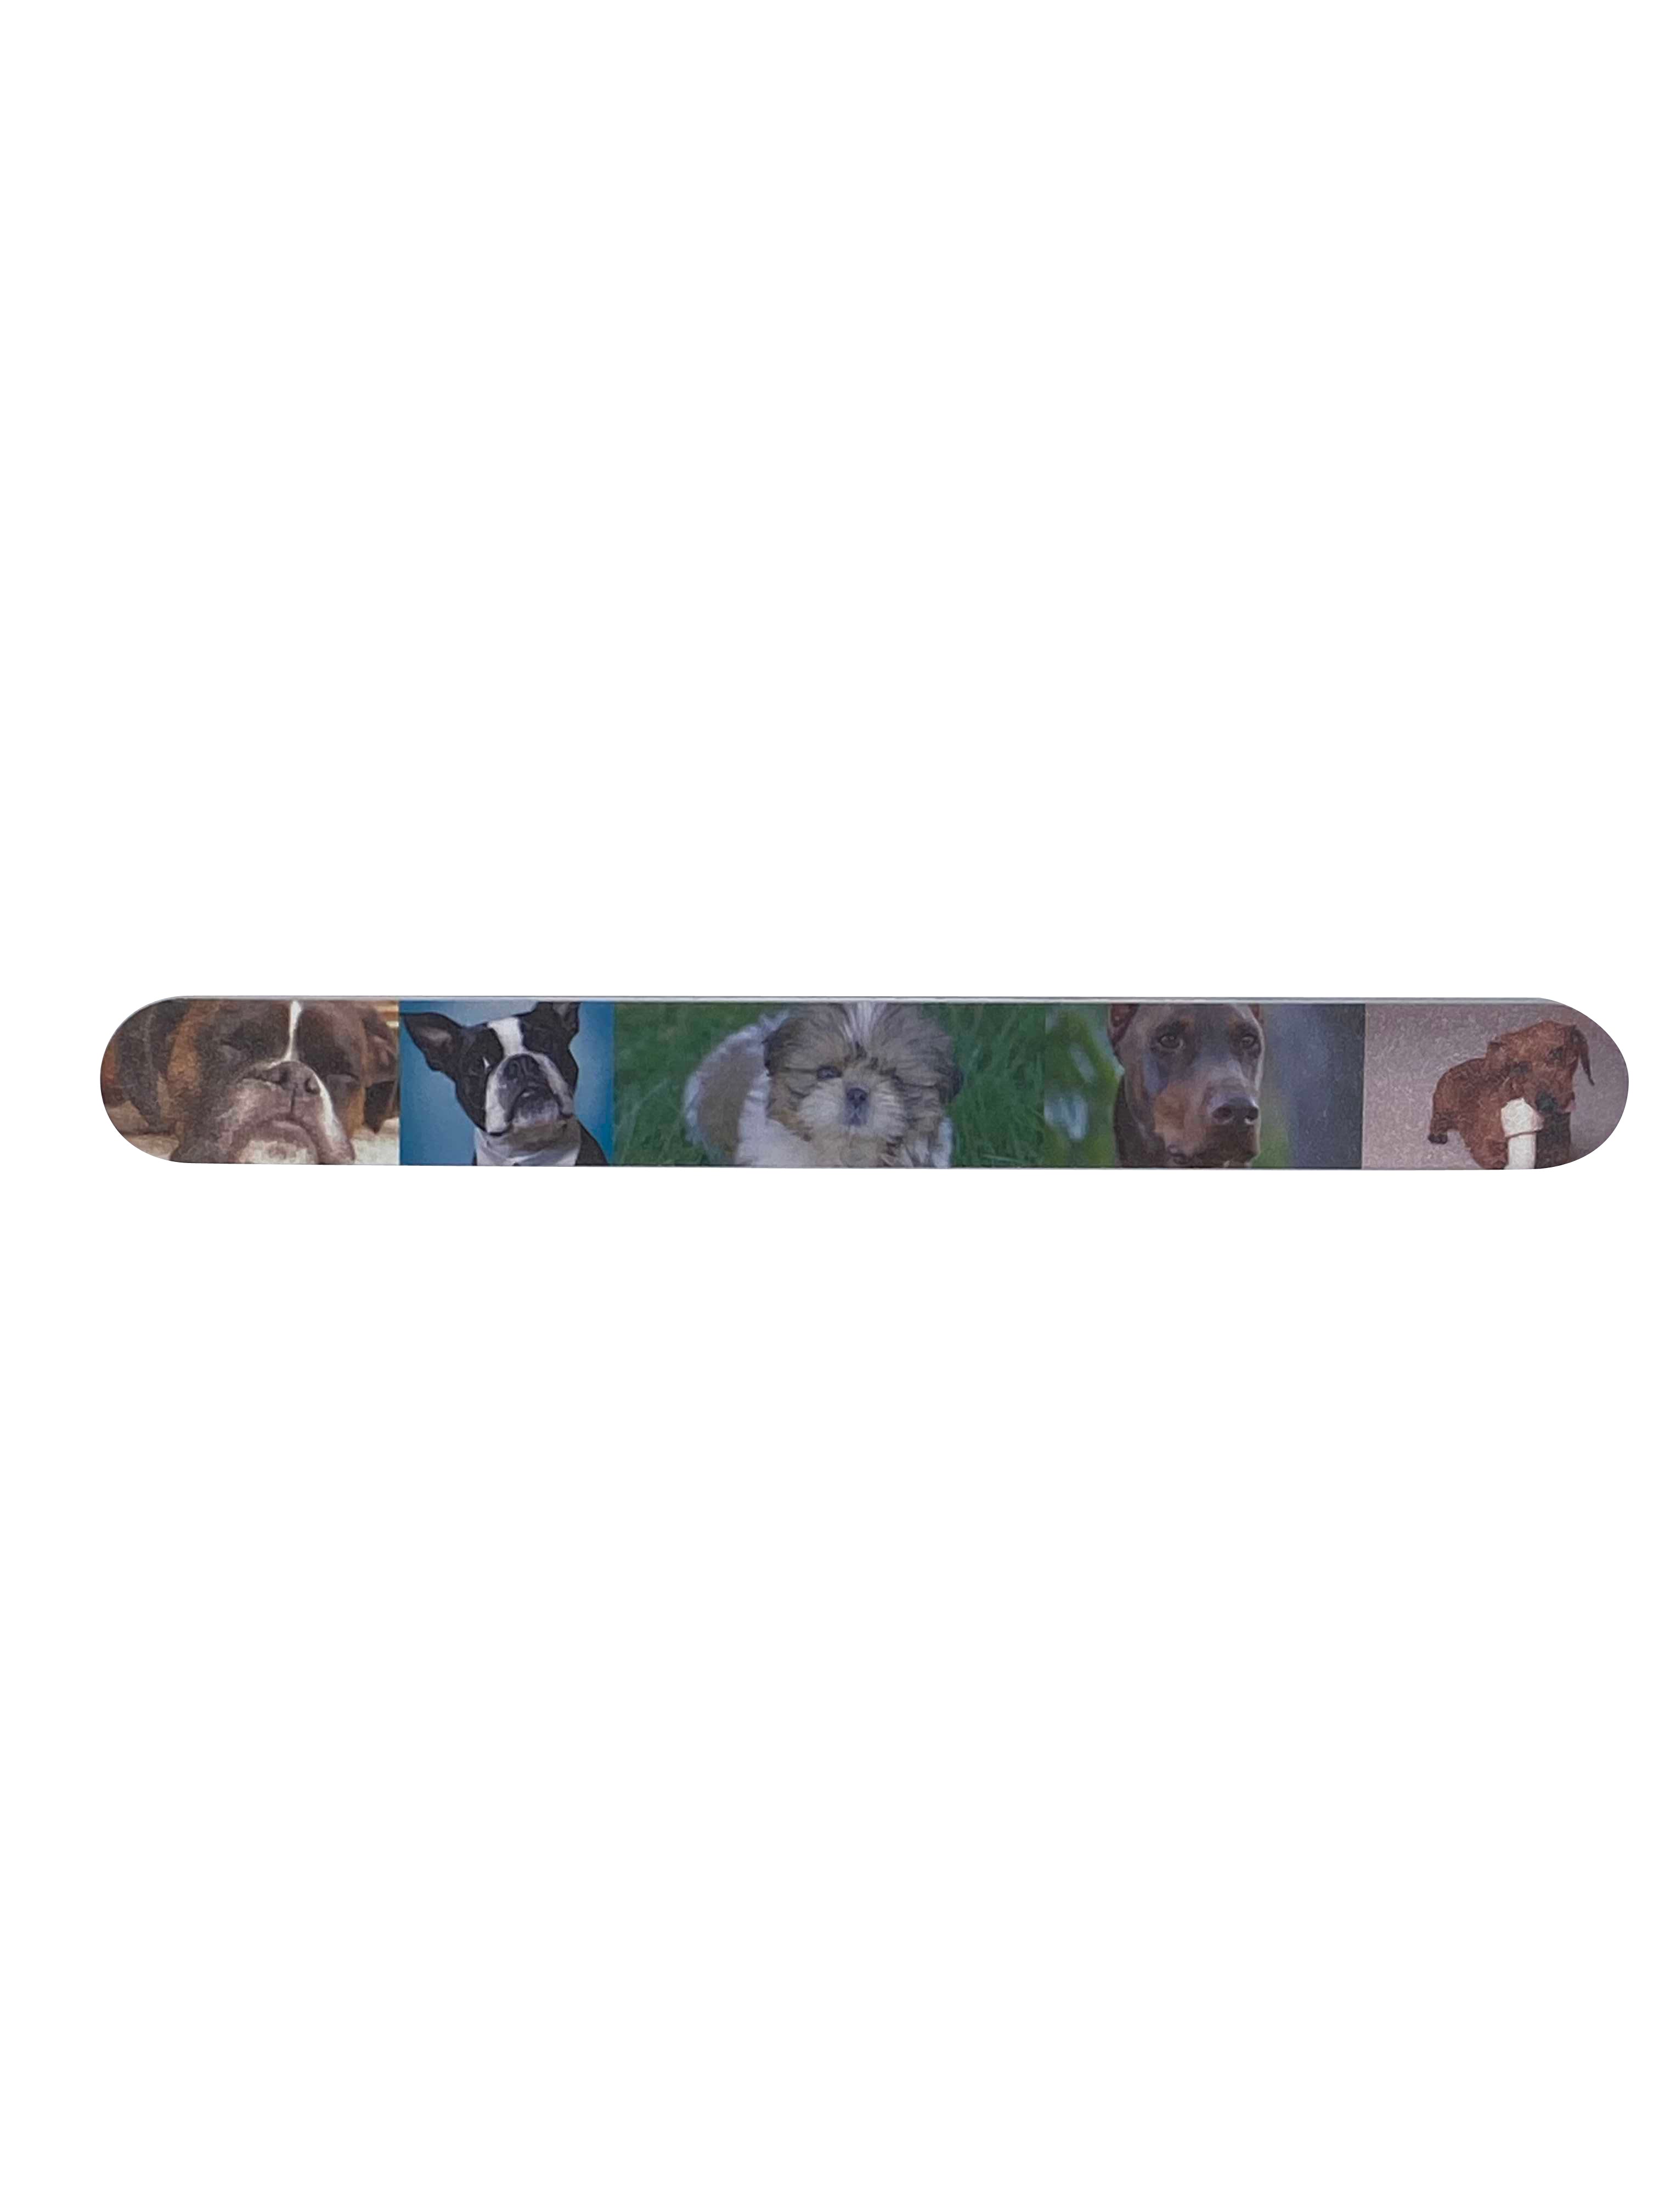 Nail File - For Dogs or Humans - 6 Pack Deals & Packages Warren London Mixed Breeds 1 File 